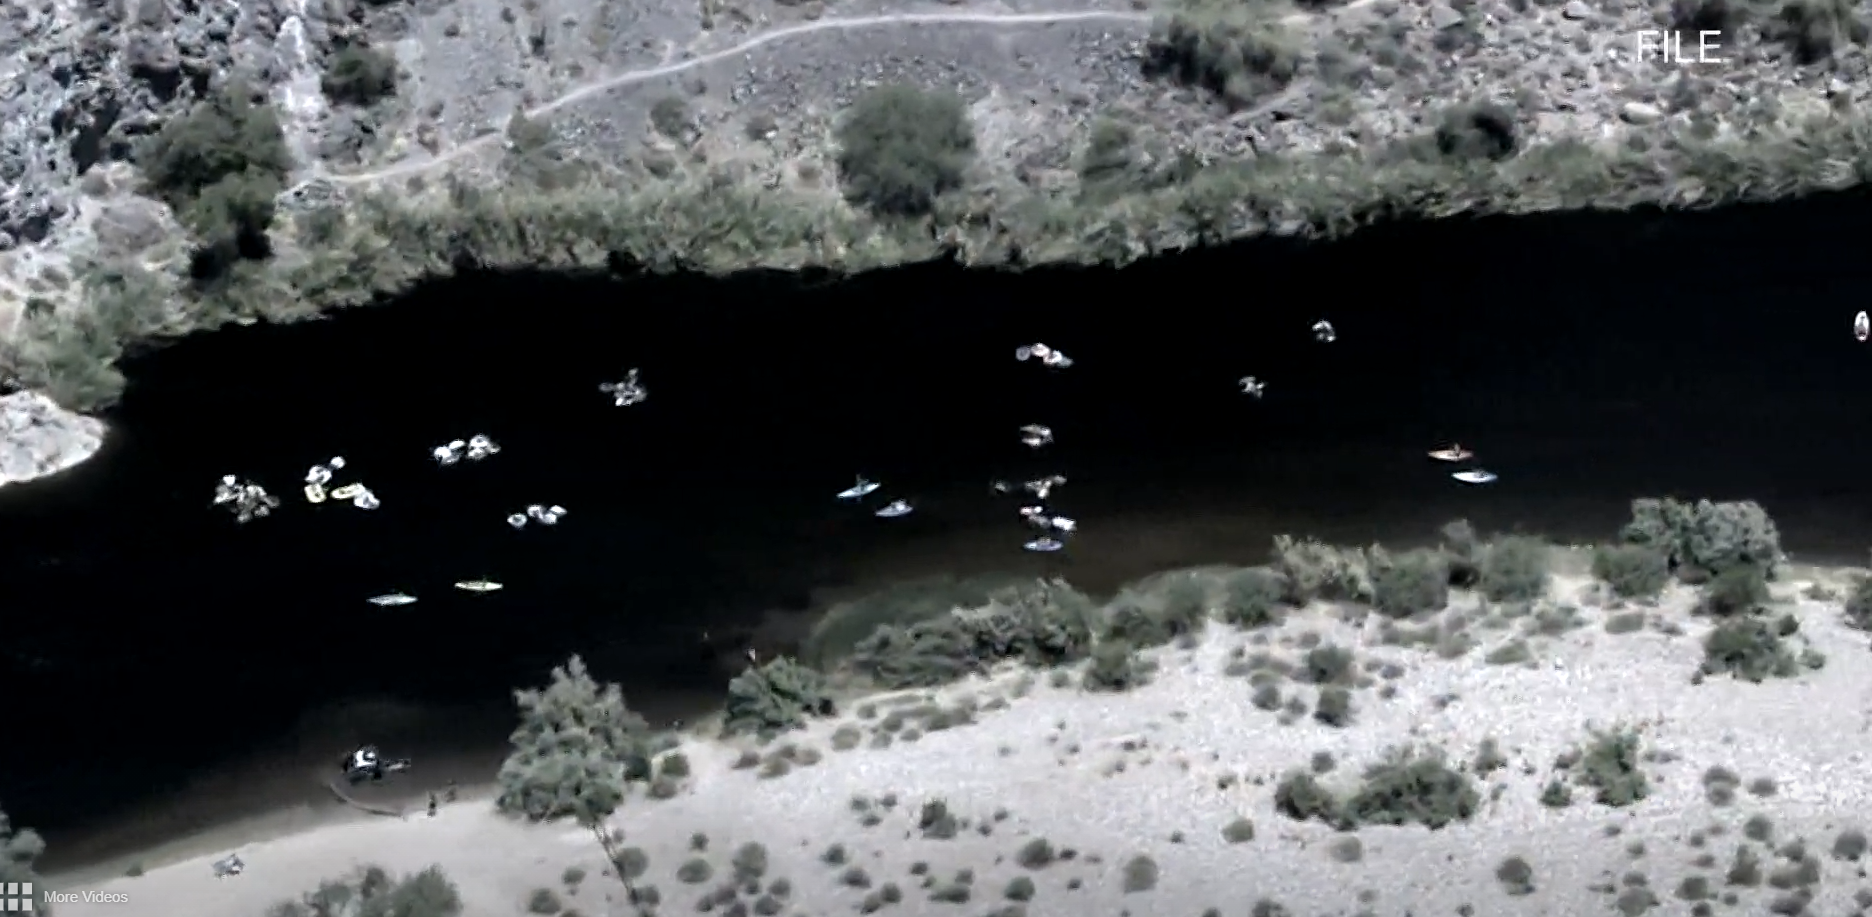 Every year the Salt River proves that it can be deadly.